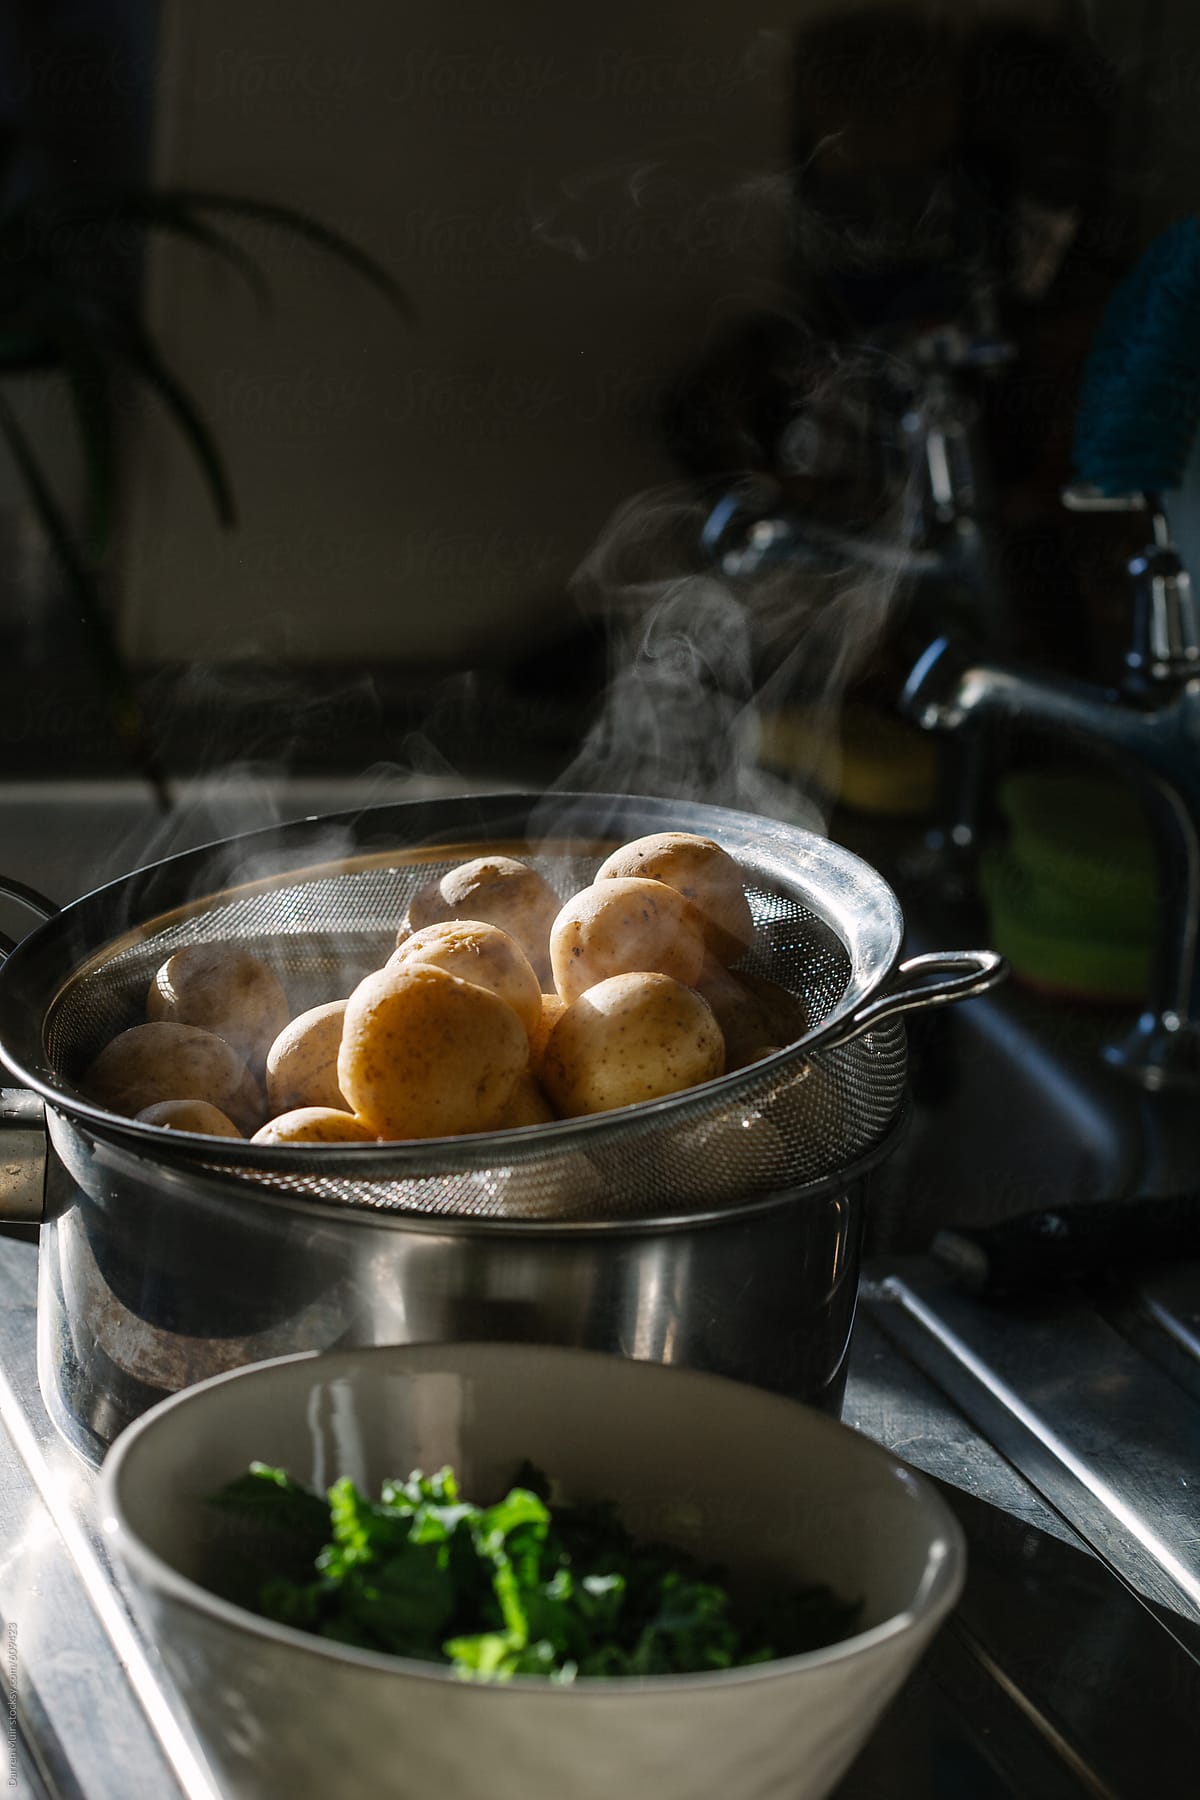 Freshly cooked new potato\'s with steam coming from them,draining by the kitchen sink.